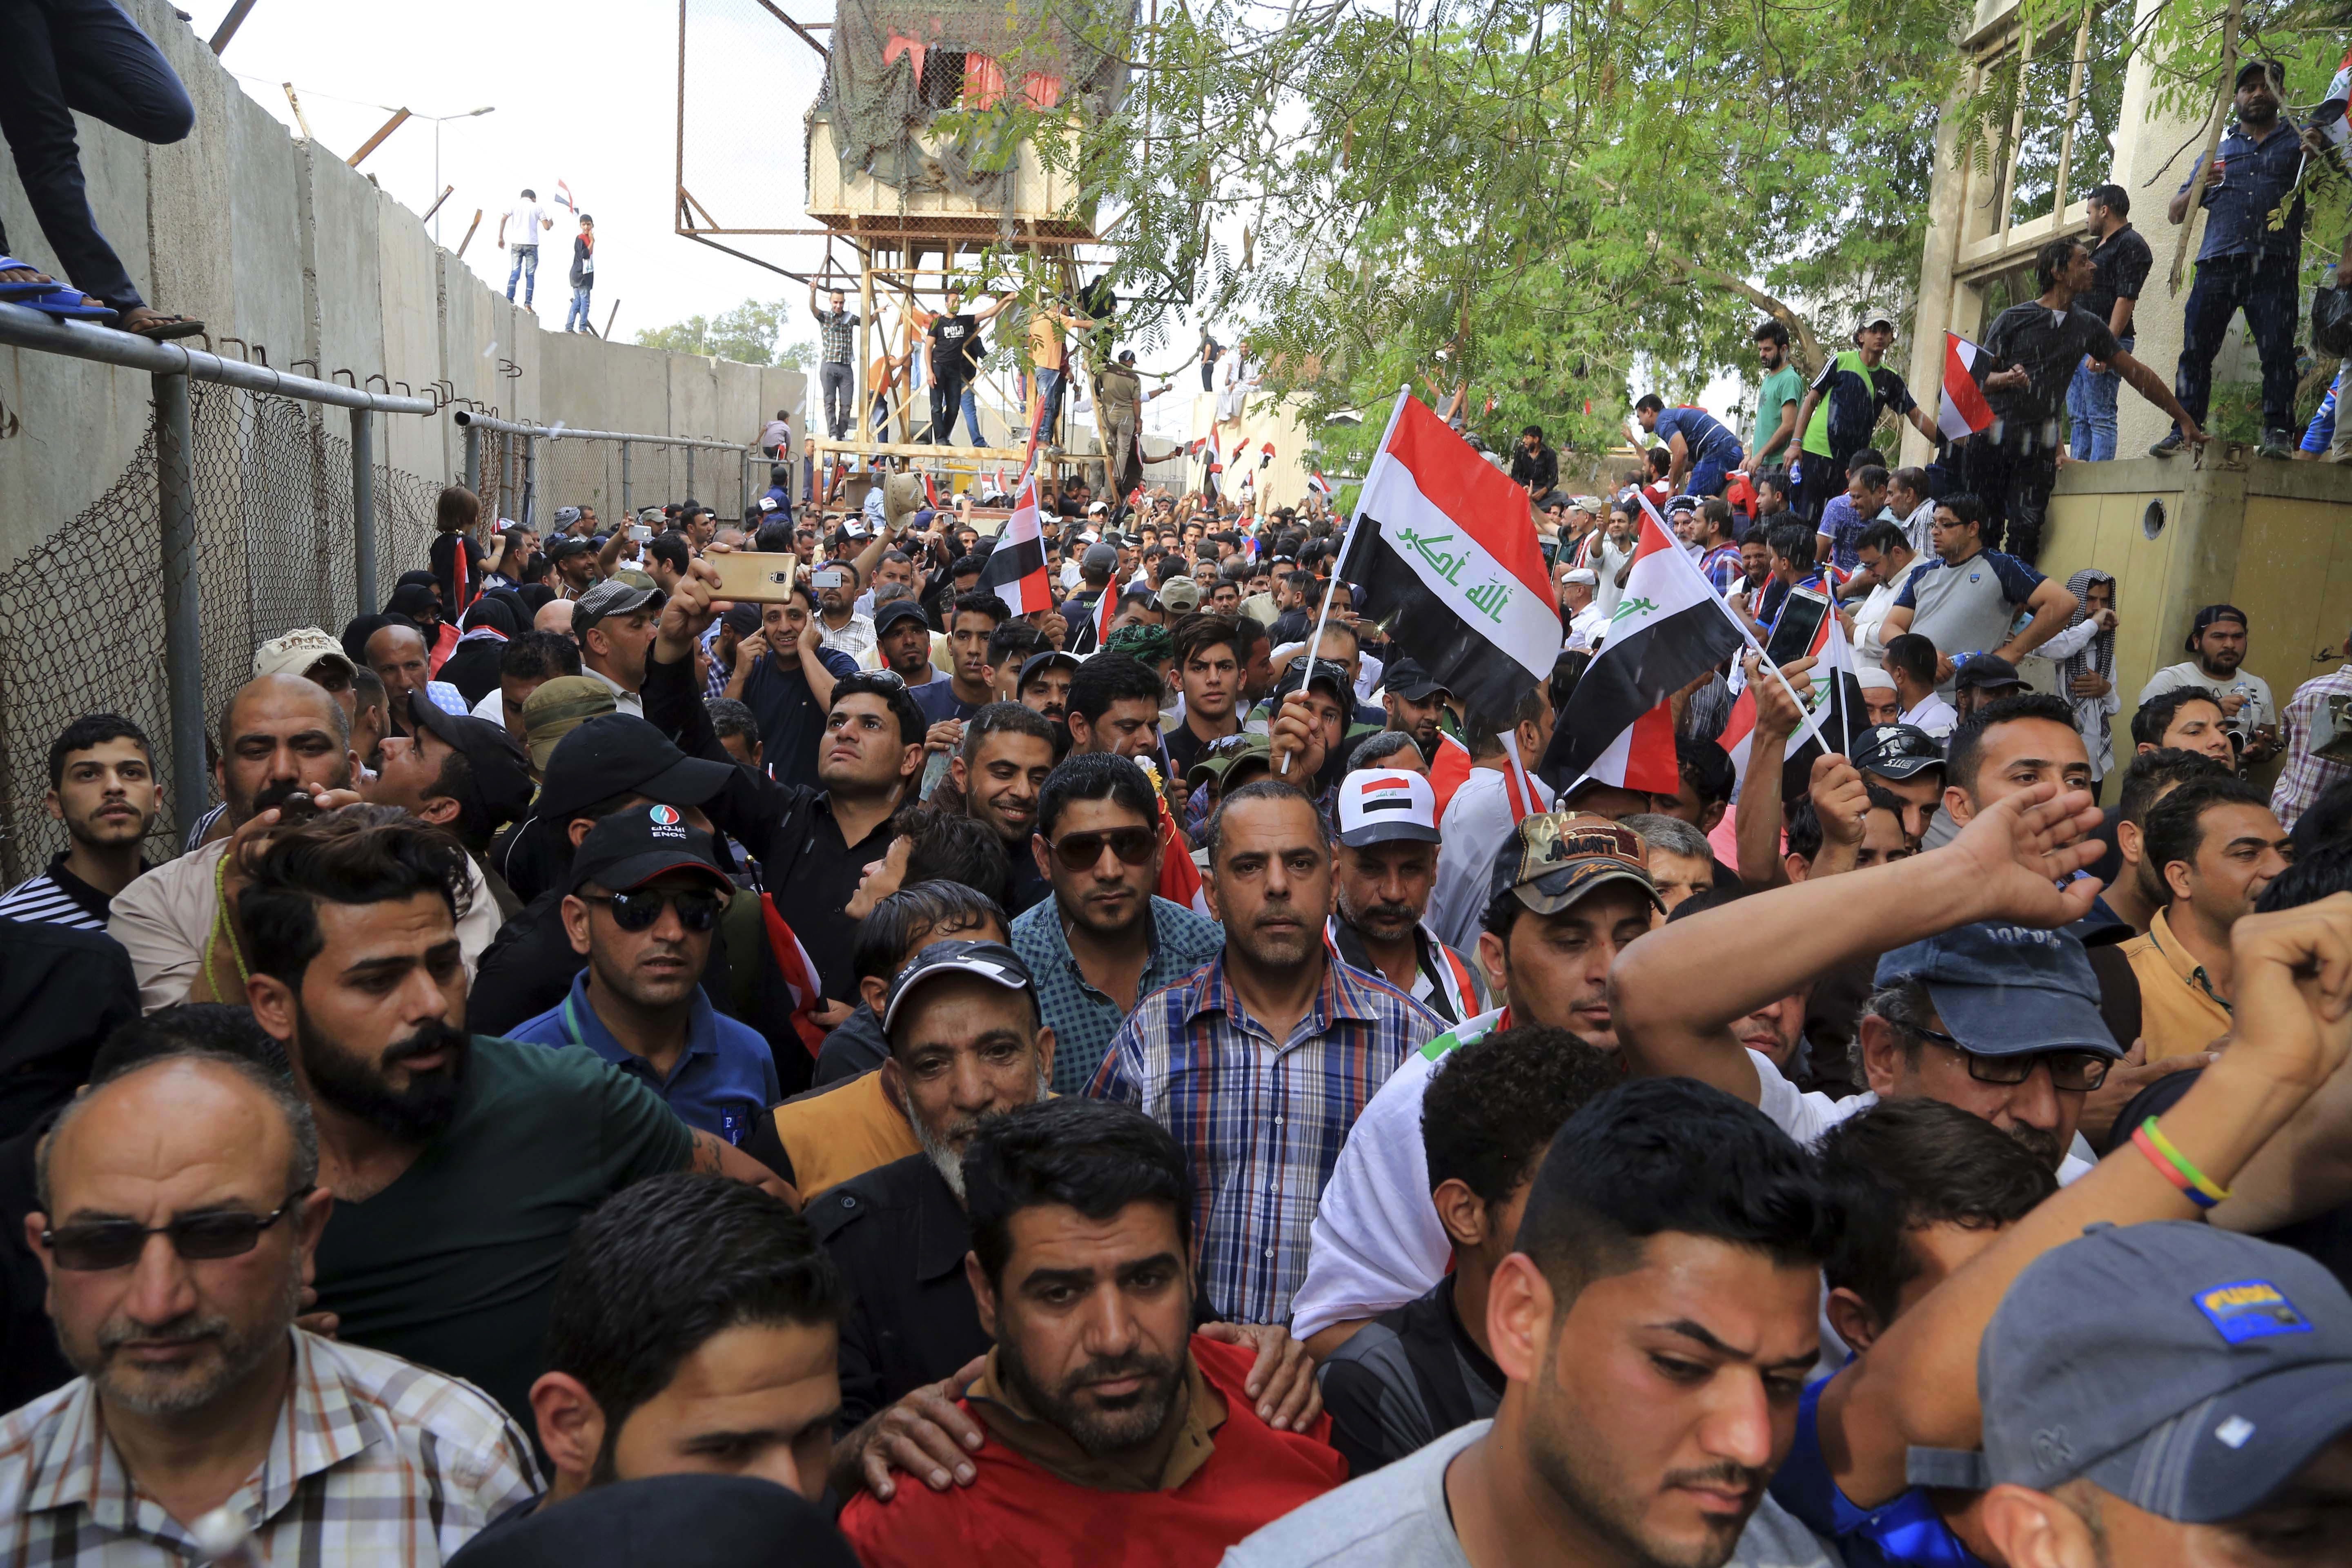 Supporters of Shiite cleric Muqtada al-Sadr storm the Green Zone, Saturday, April 30, 2016. Dozens of protesters climbed over the blast walls and could be seen storming the Parliament building, carrying Iraqi flags and chanting against the government.